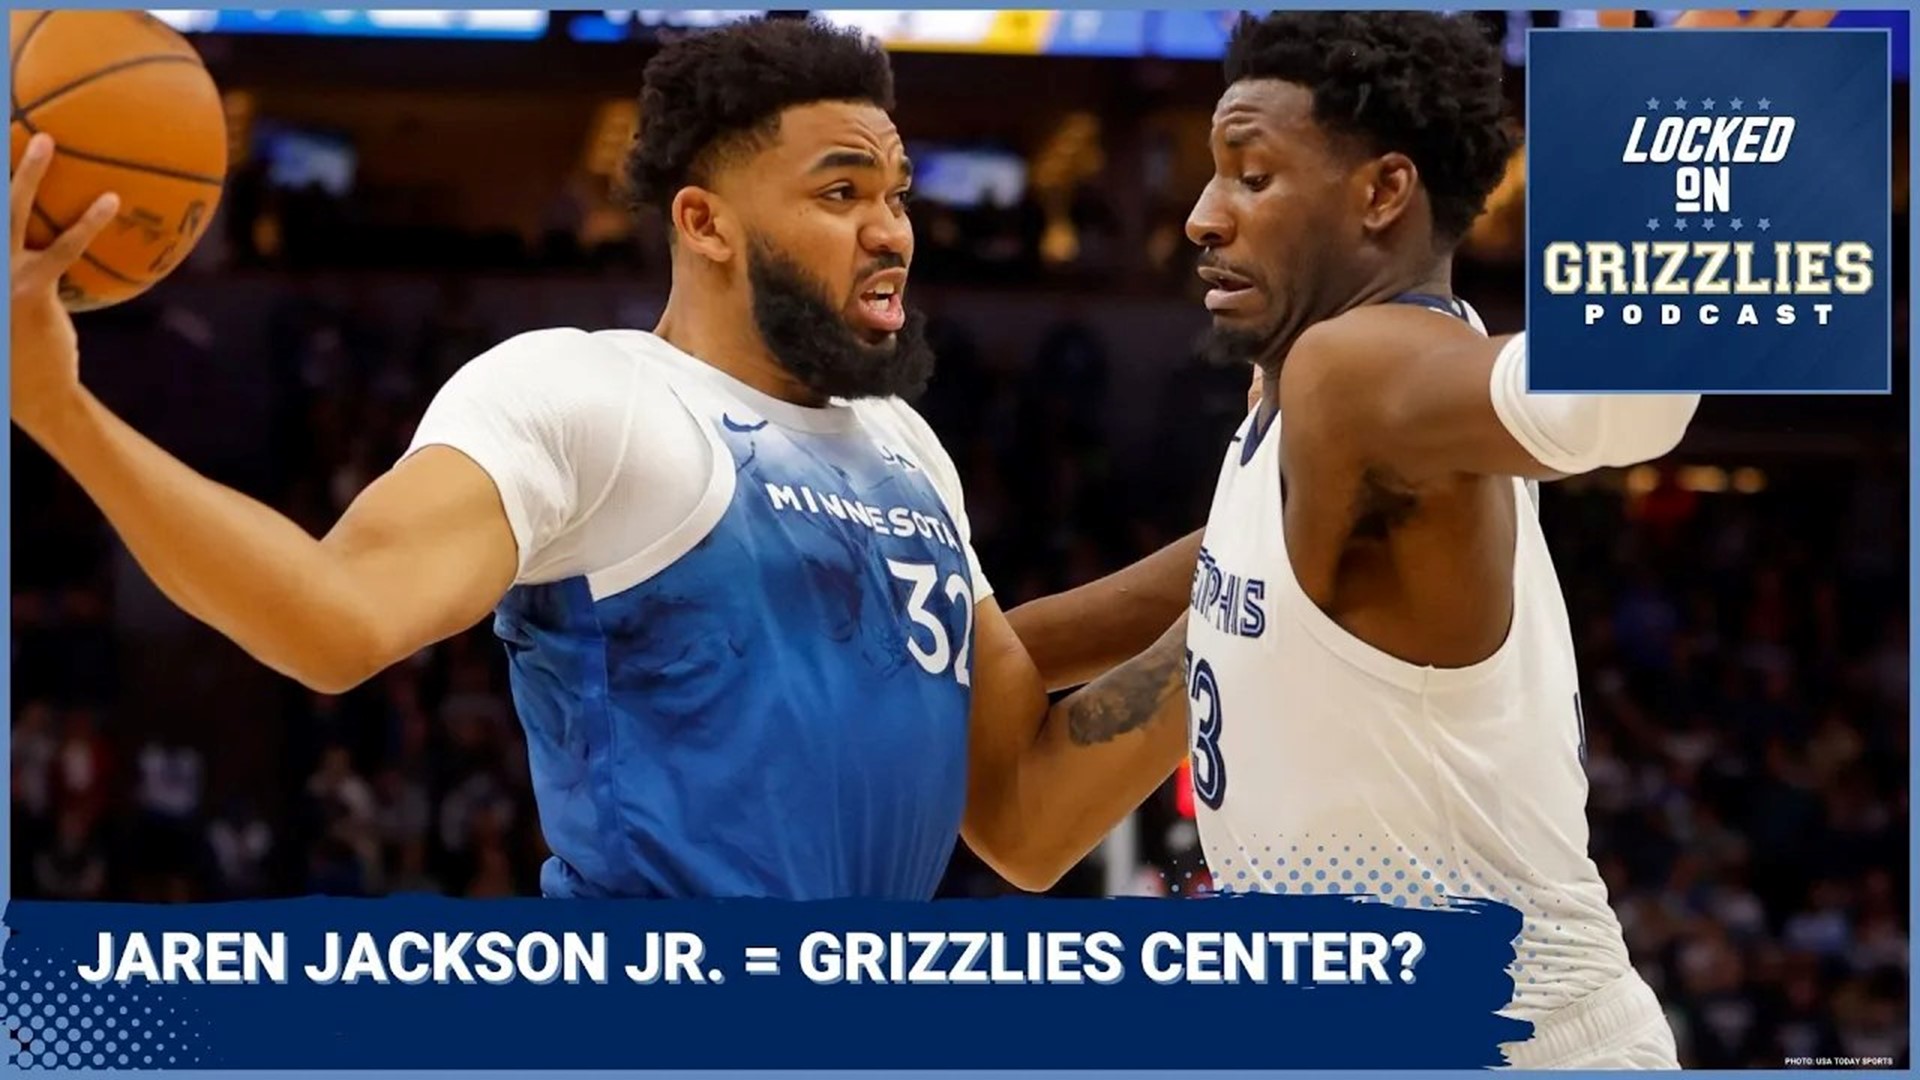 Jaren Jackson Jr. shines at center, but the Grizzlies fall against the Timberwolves